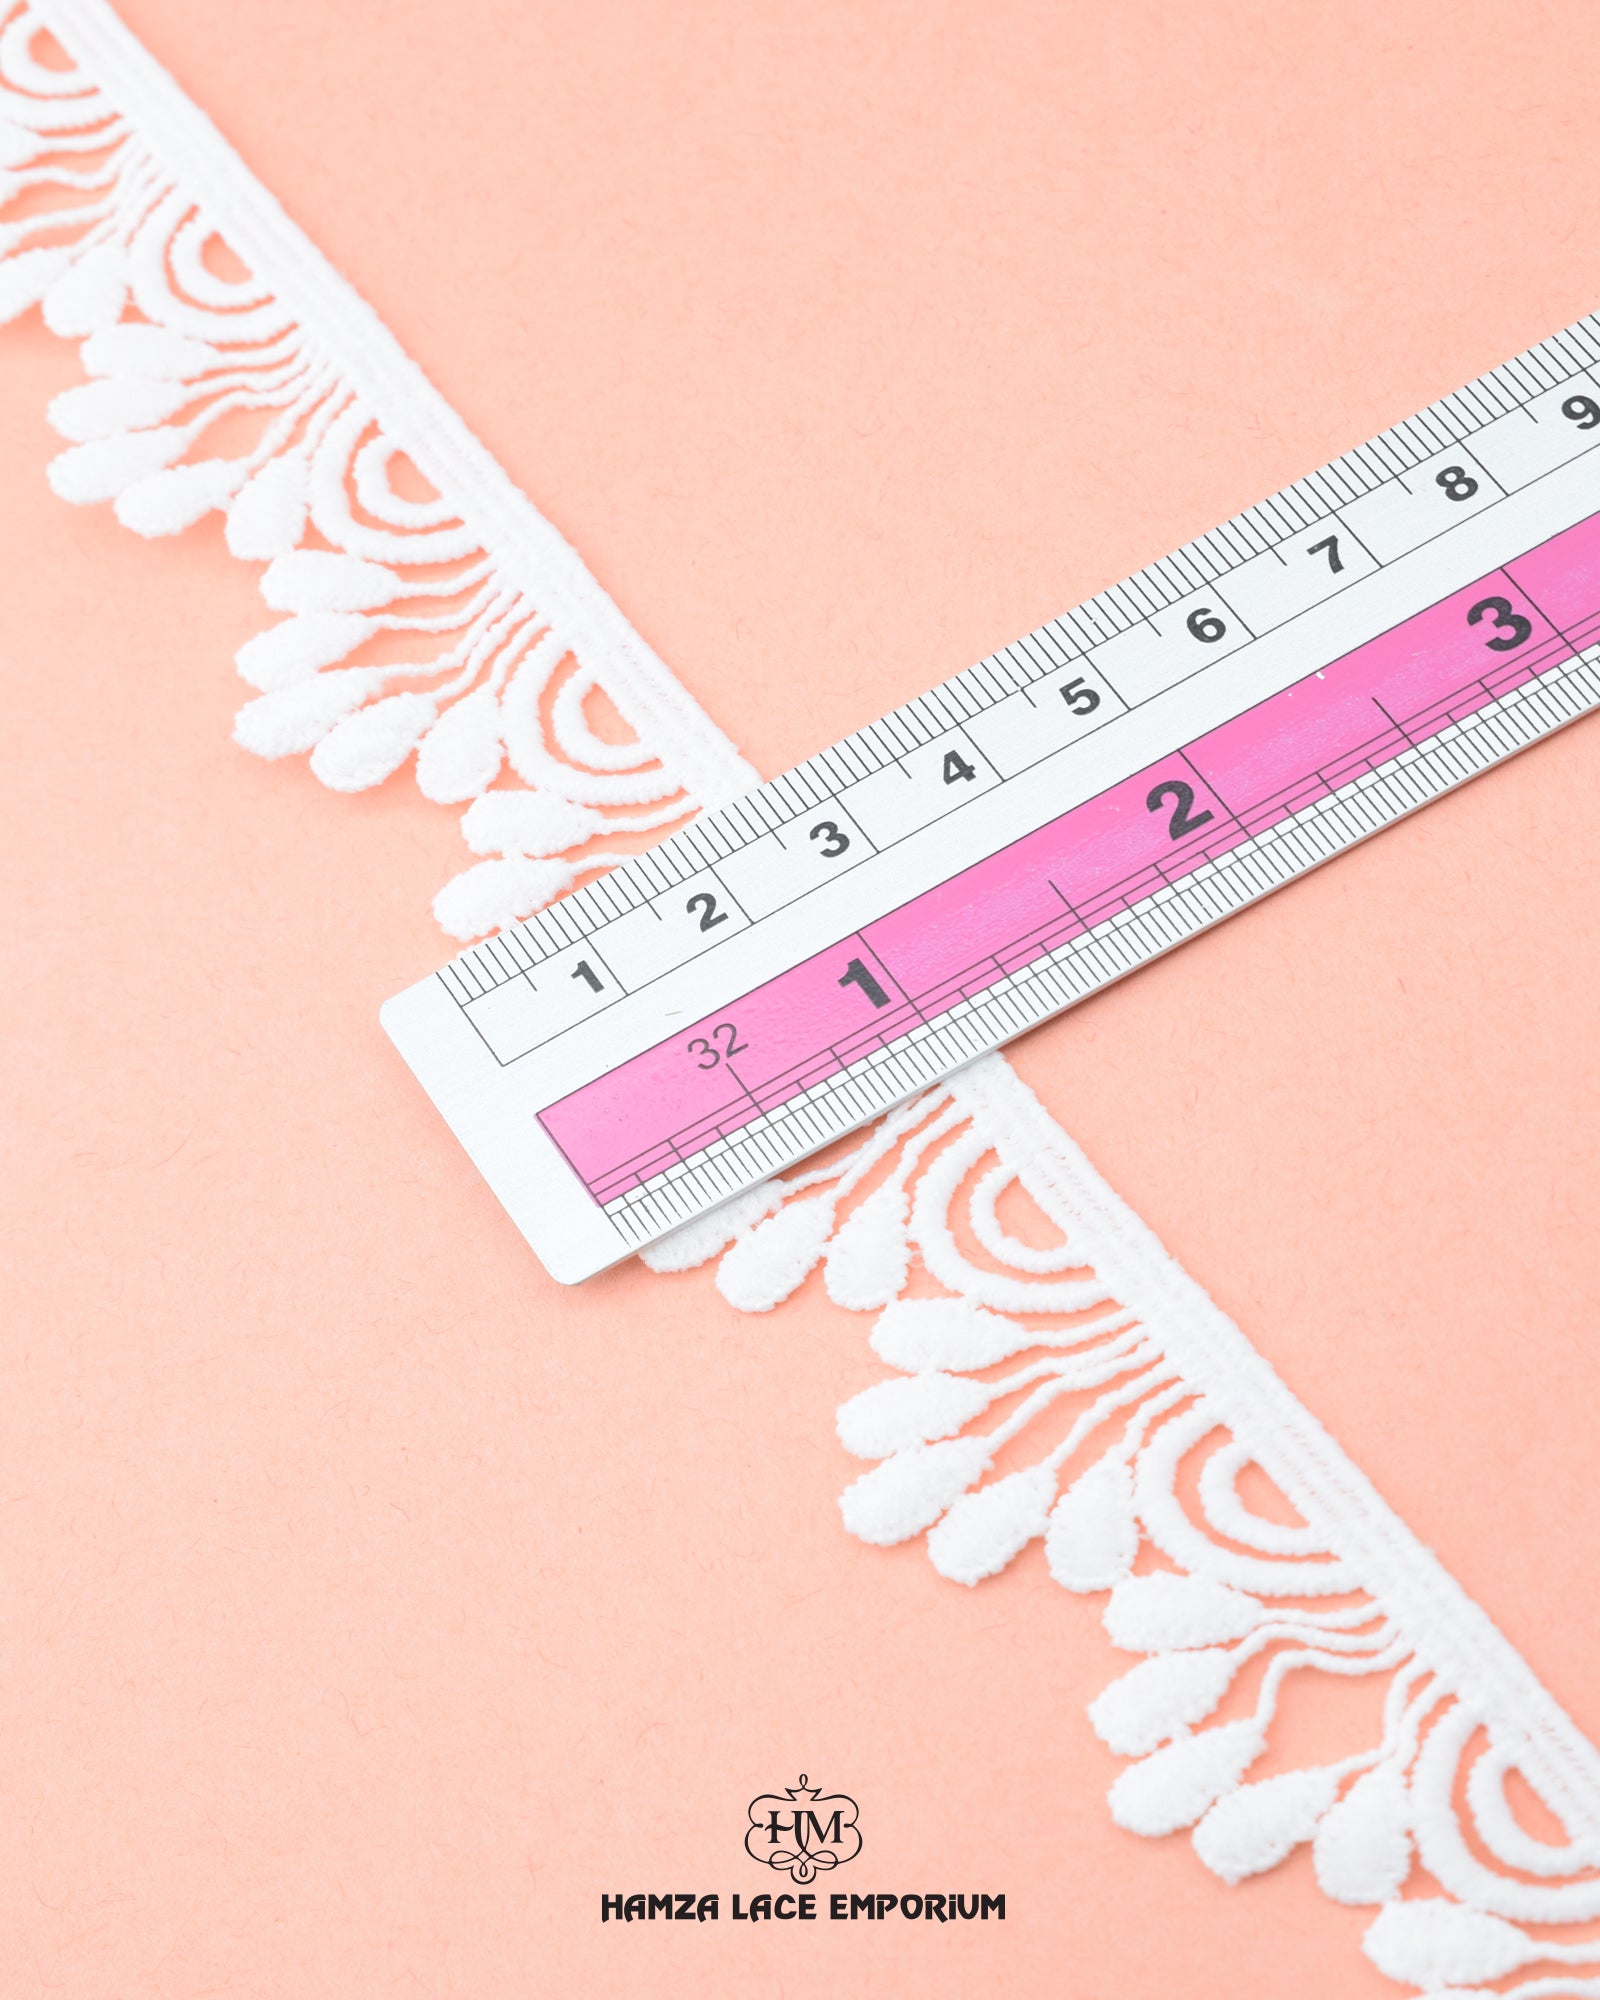 The white color 'Edging Lace 23651' is pictured with a ruler showing its size which is 1.25 inches